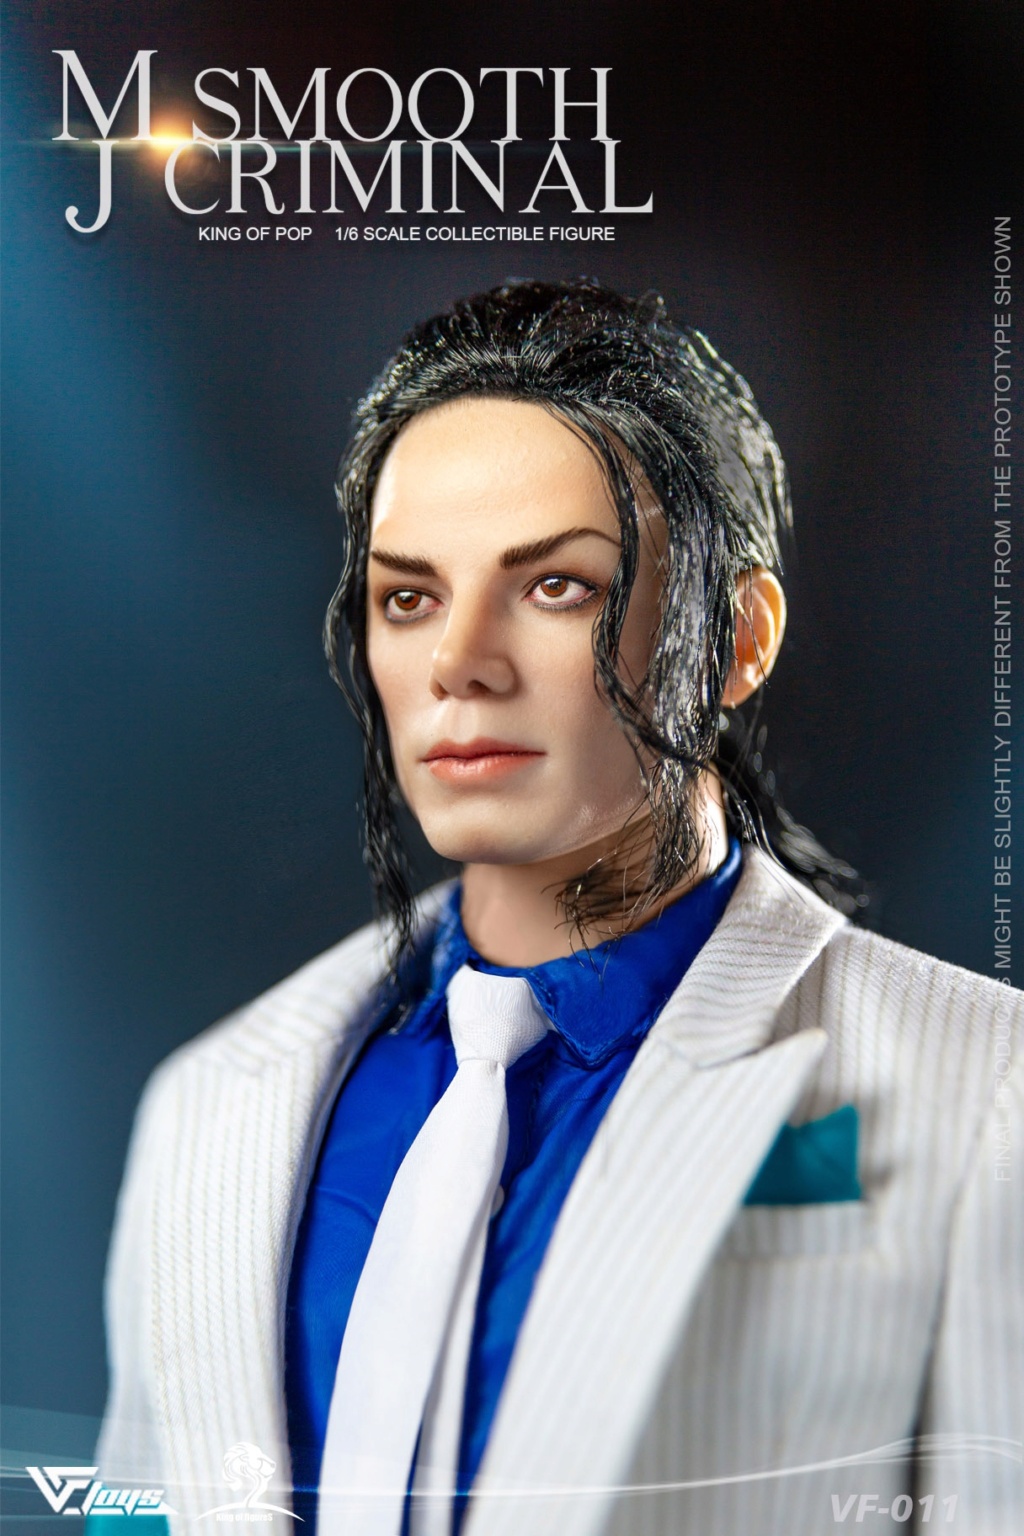 NEW PRODUCT: VFTOYS: VF-011 1/6 Scale MJ Smooth Criminal 16190210